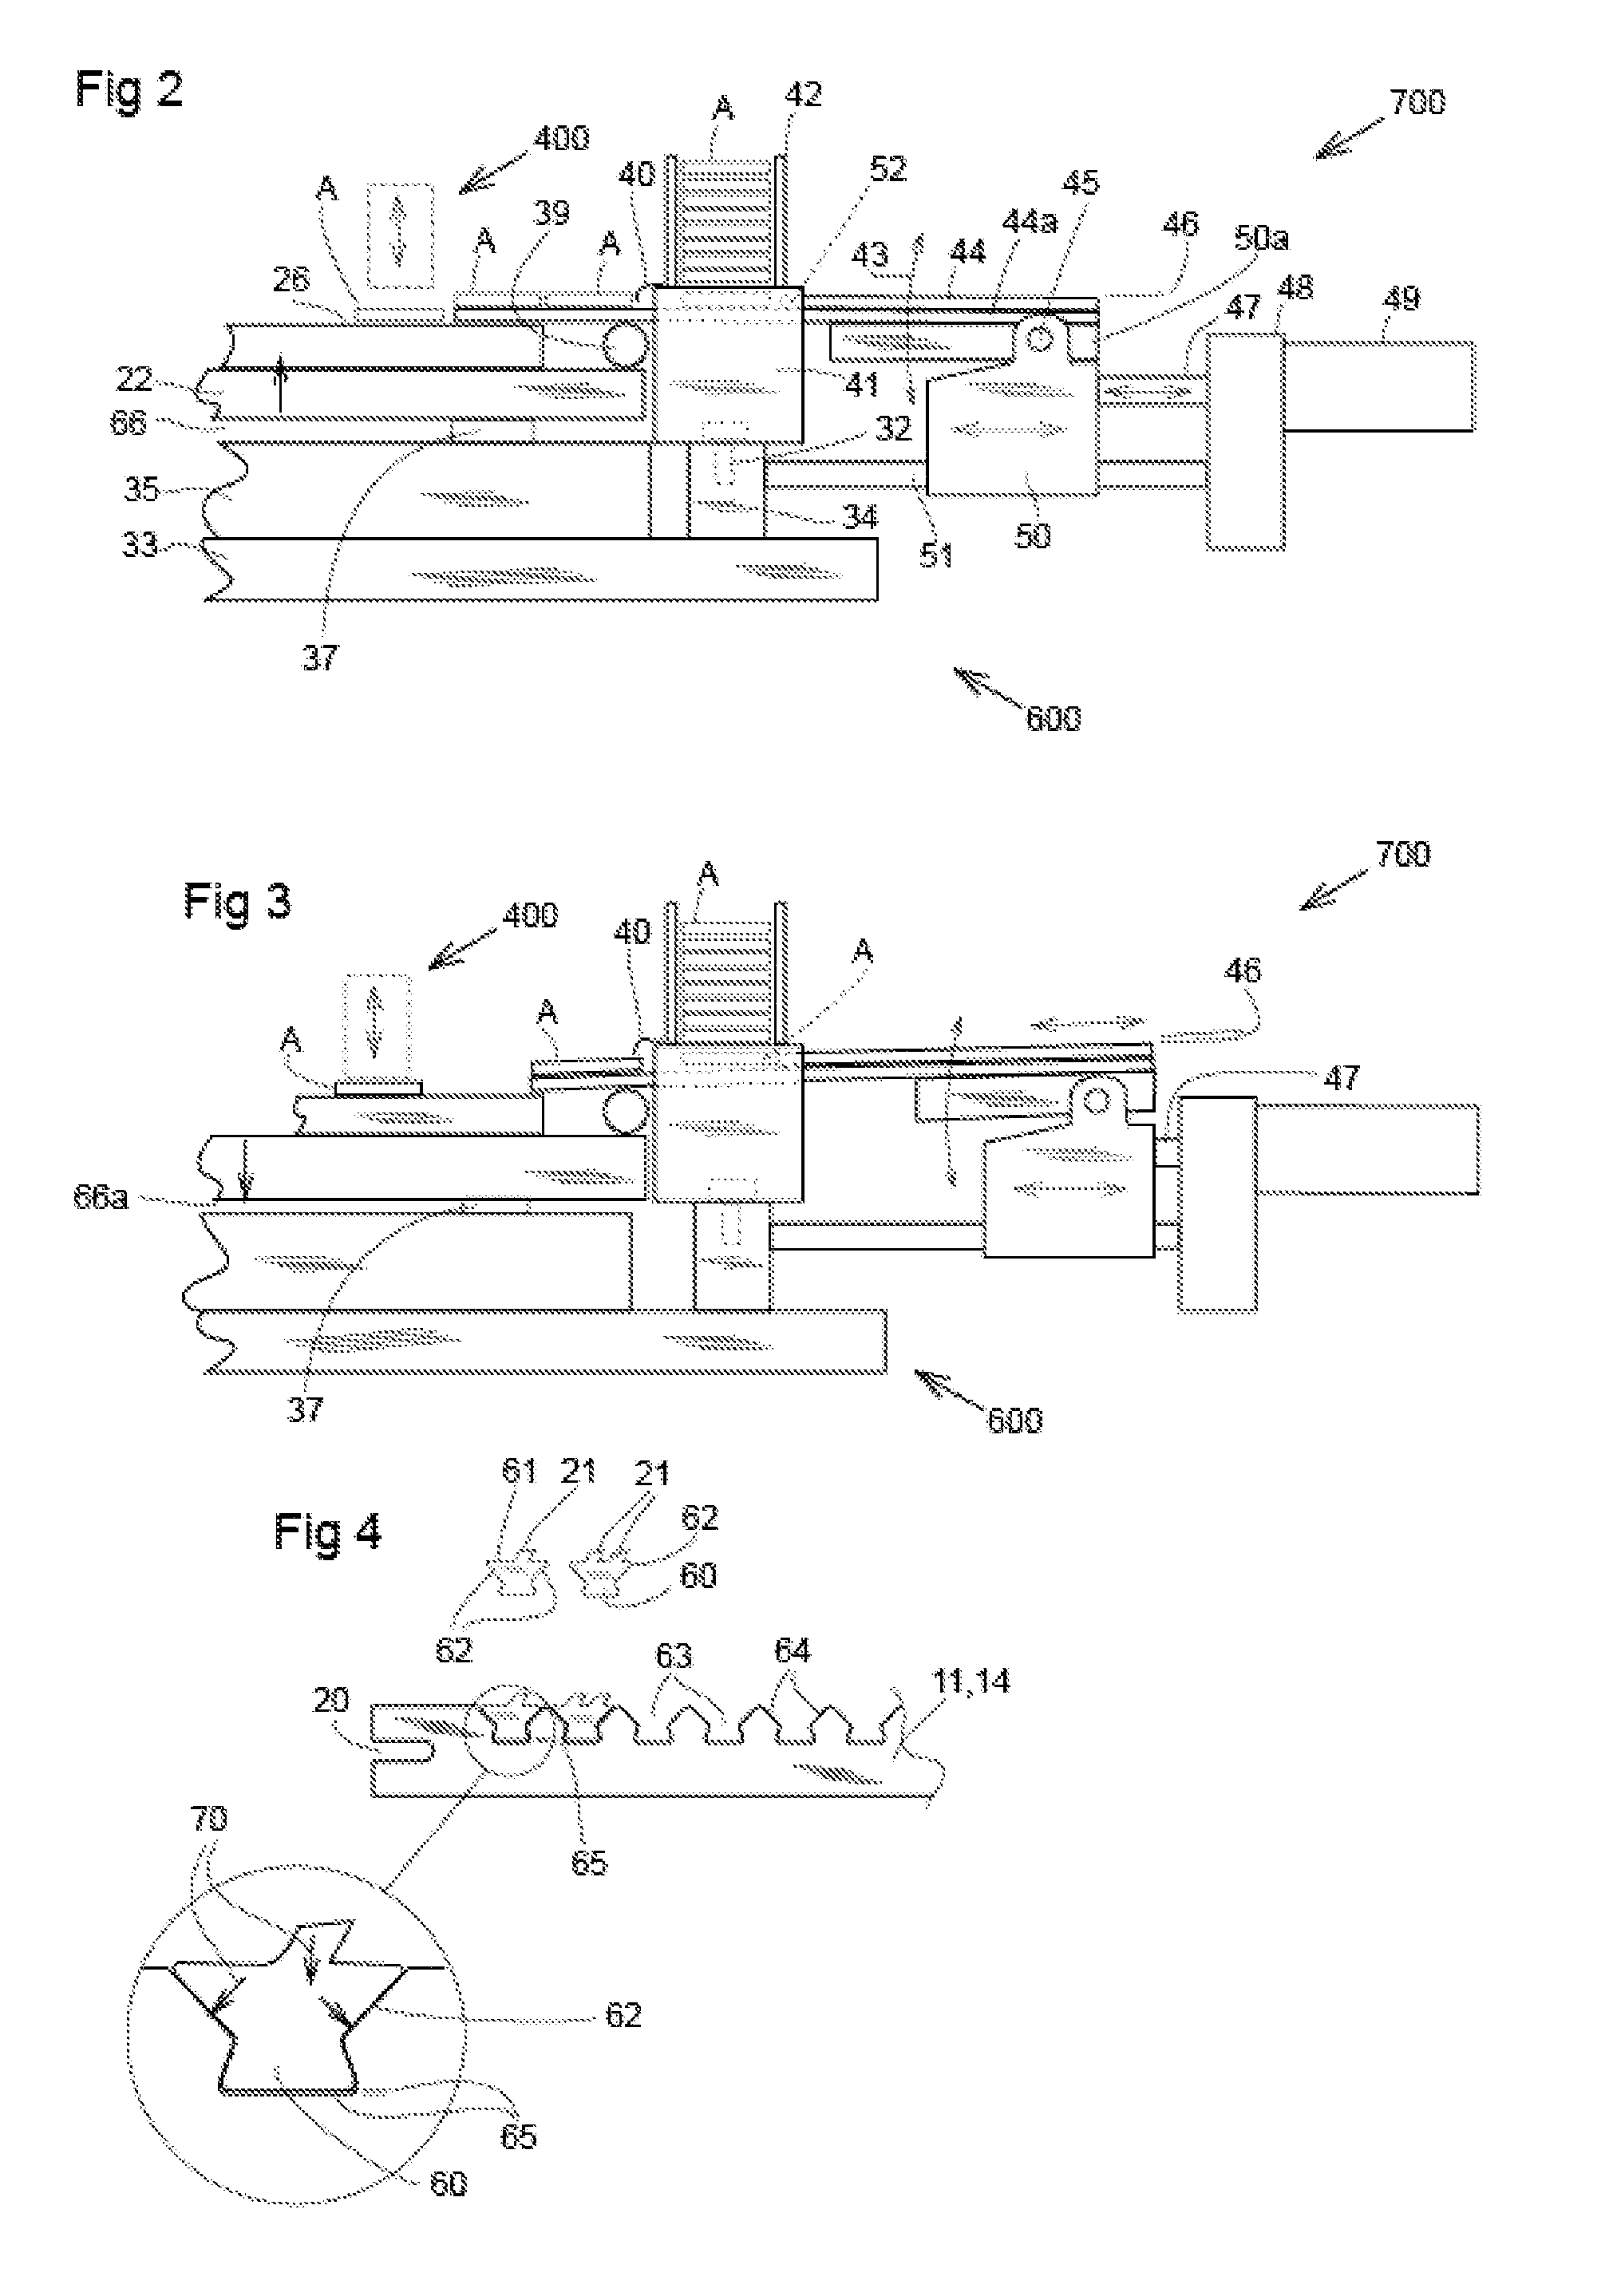 Apparatus for texturing the surface of a brake plate